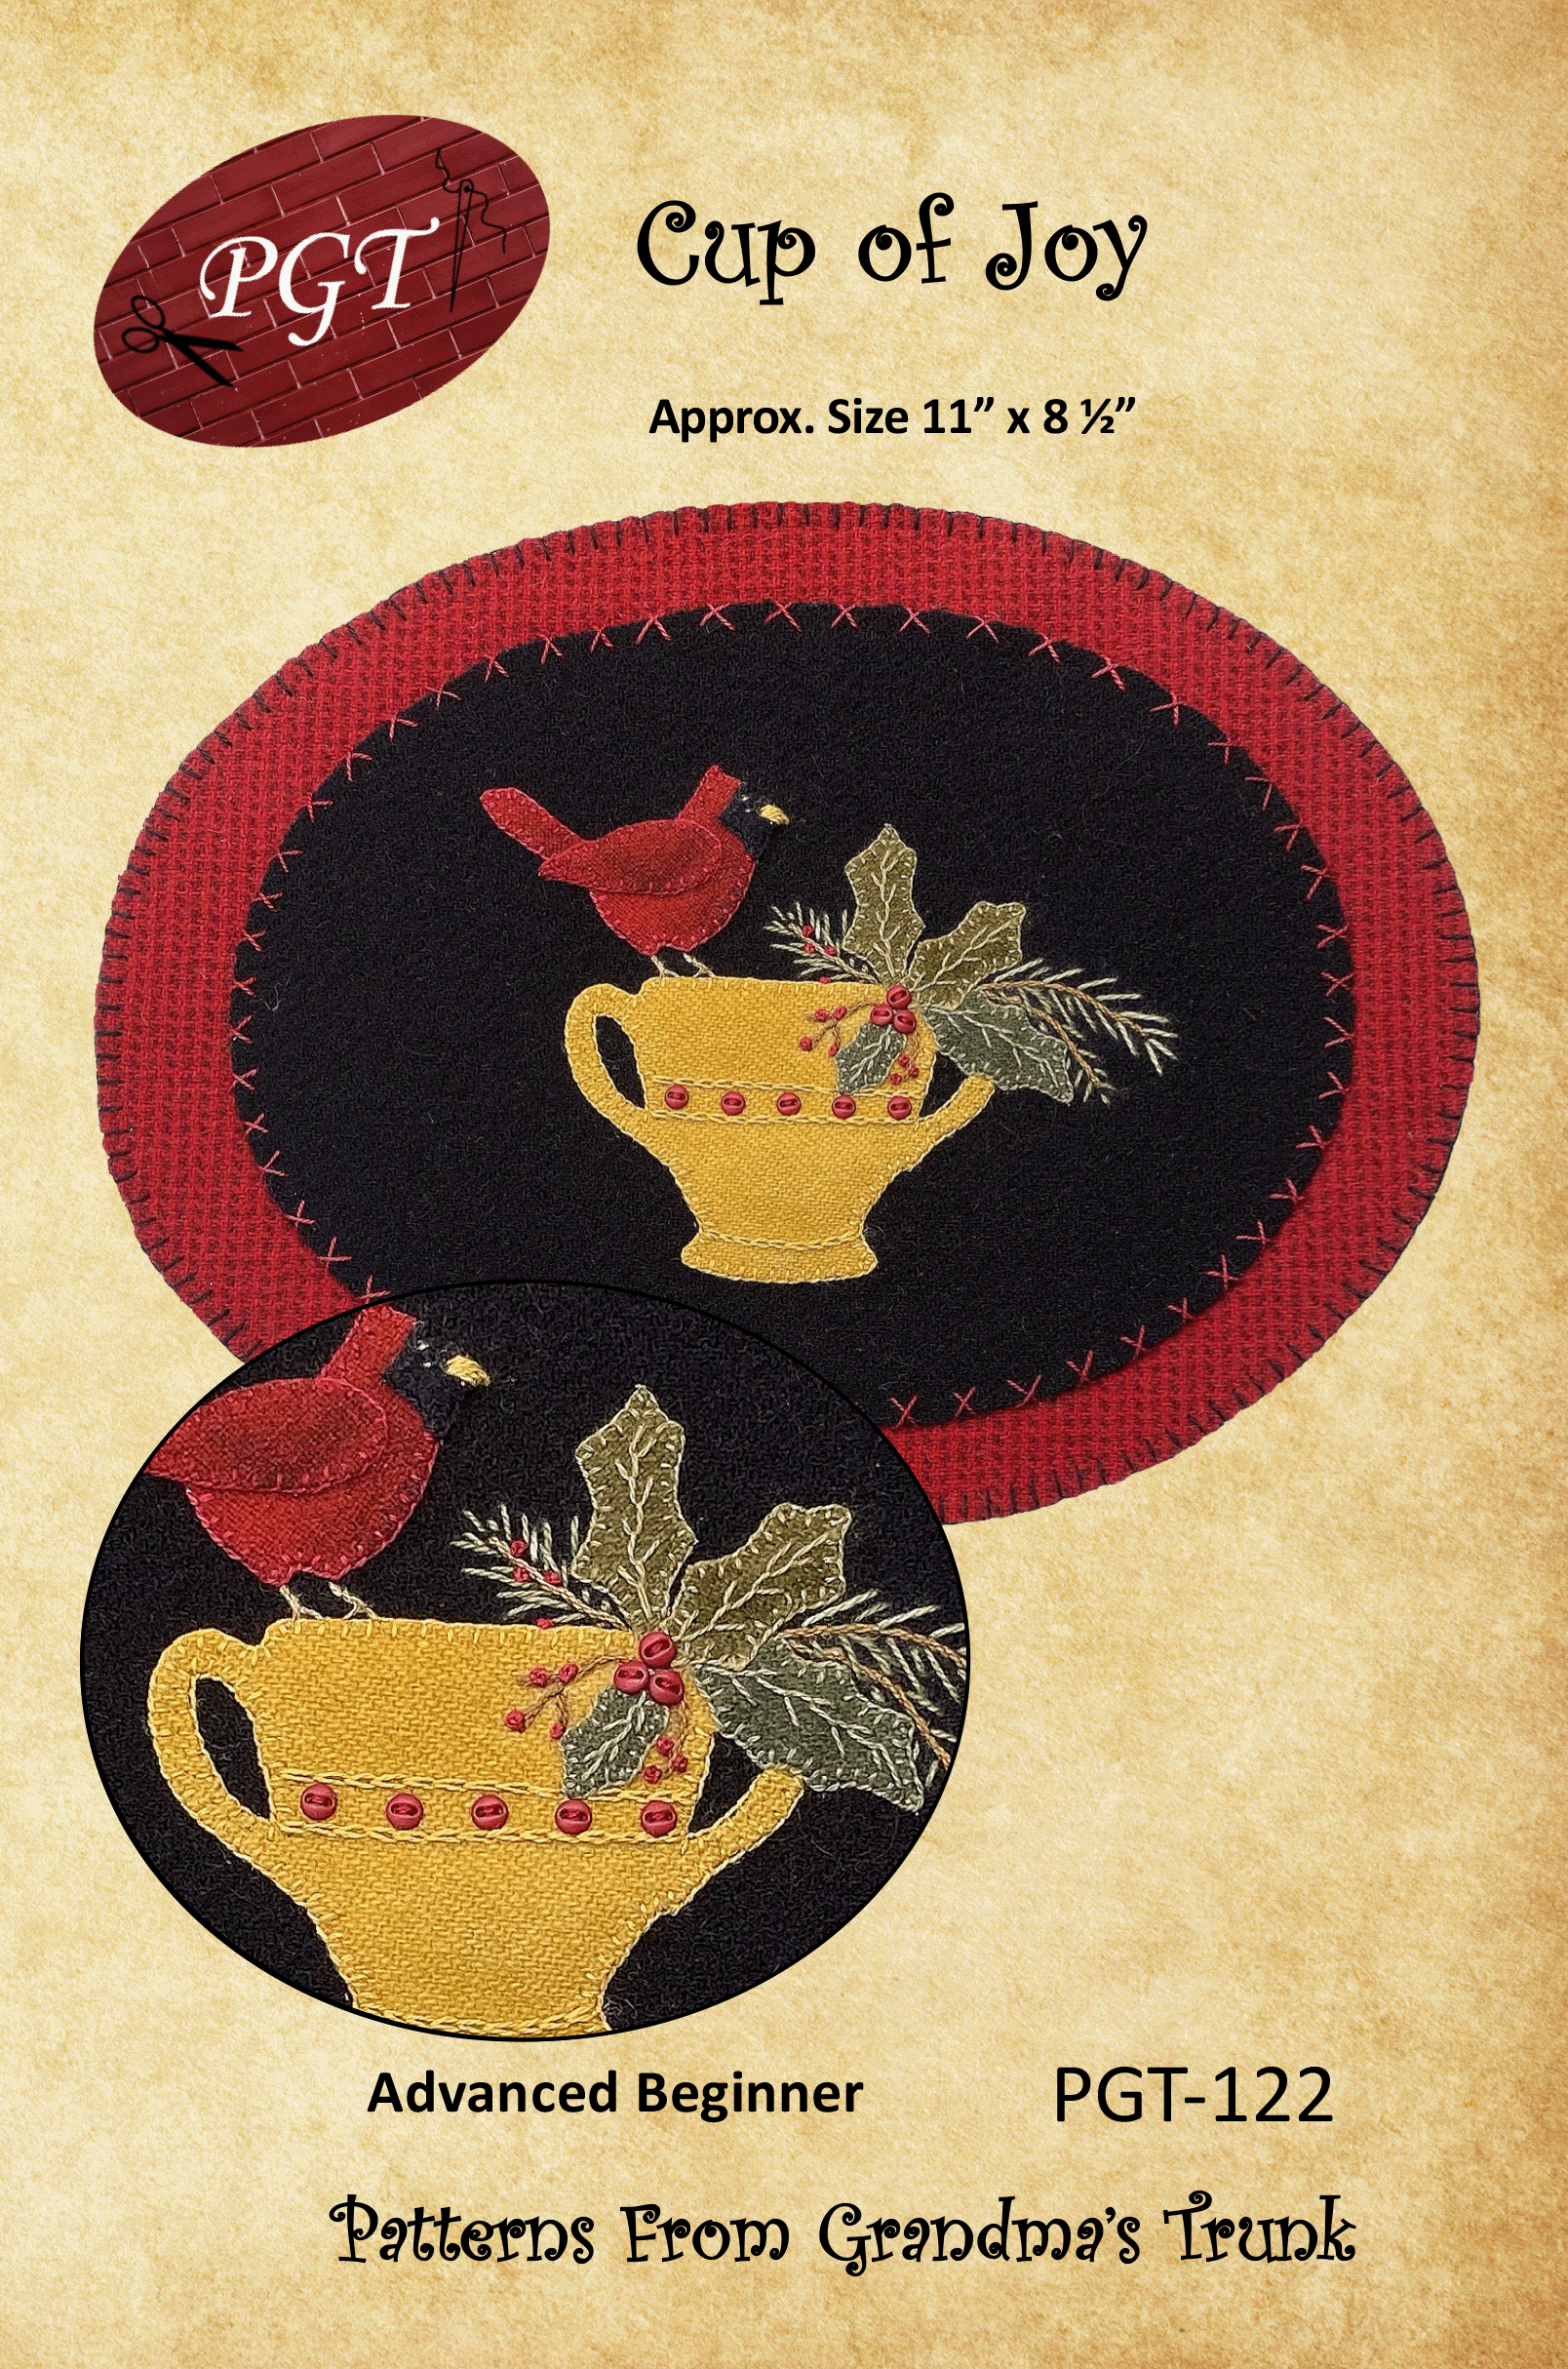 Cup of Joy Pattern Image.gif